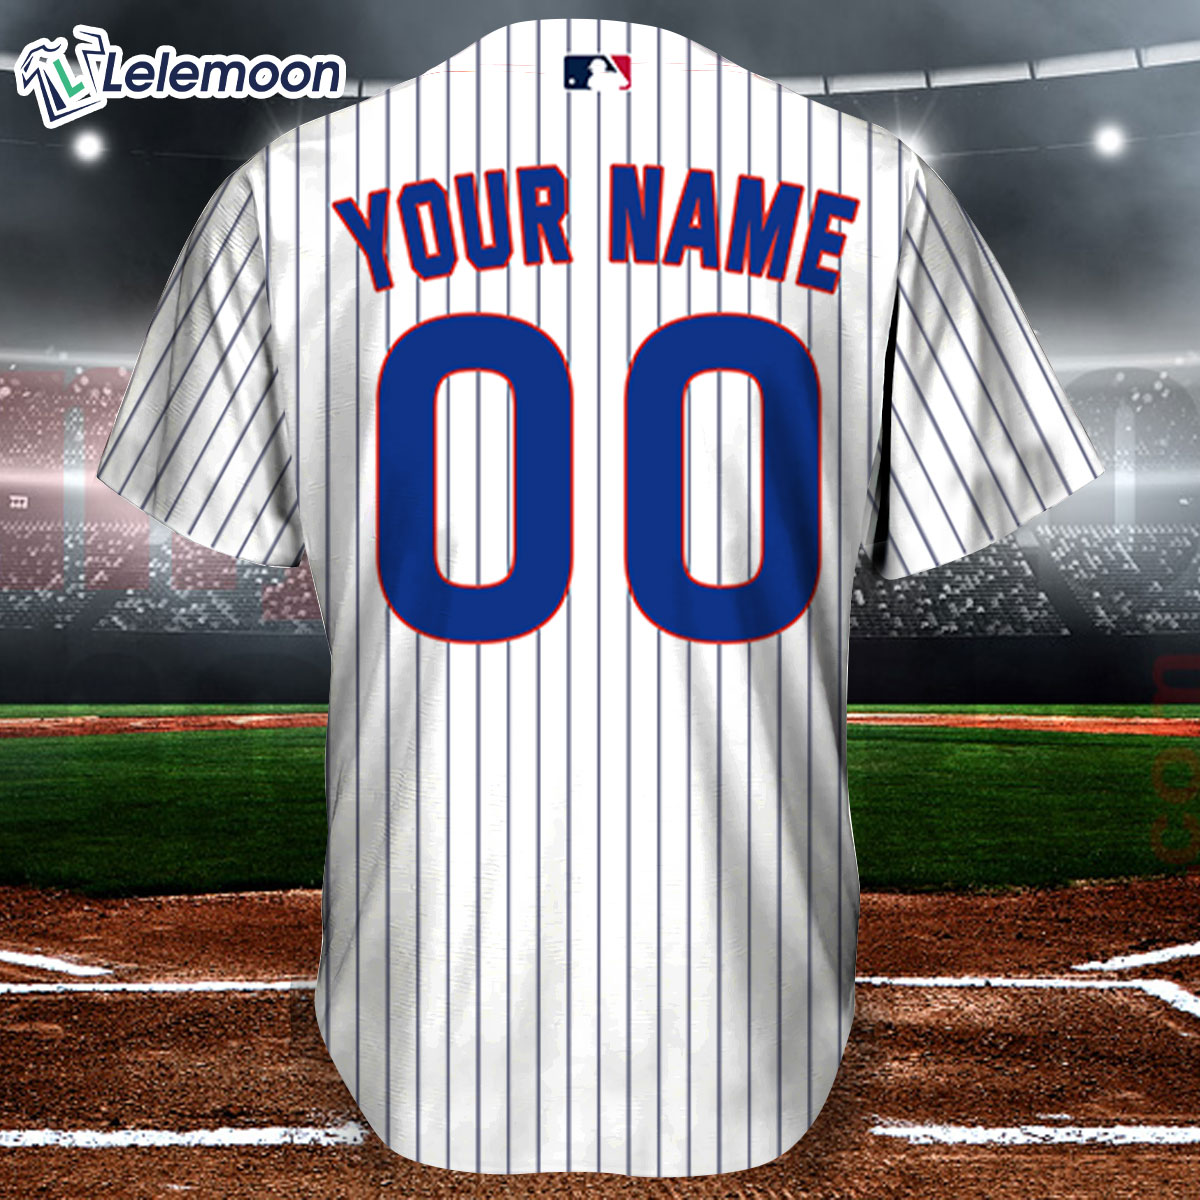 Chicago Cubs Personalized Jerseys Customized Shirts with Any Name and Number